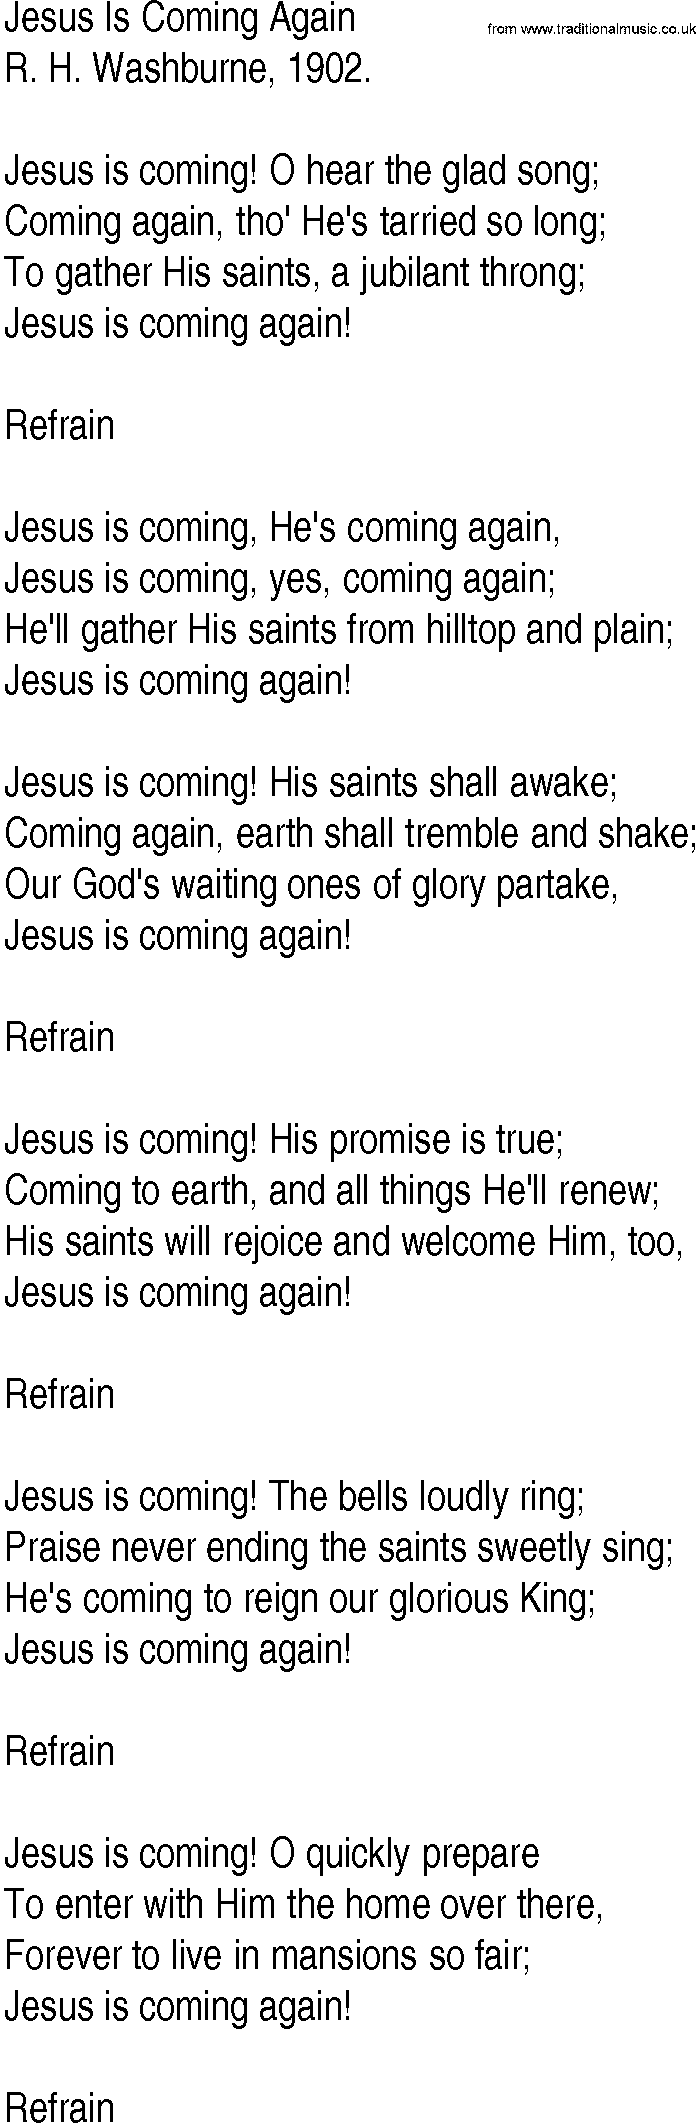 Hymn and Gospel Song: Jesus Is Coming Again by R H Washburne lyrics